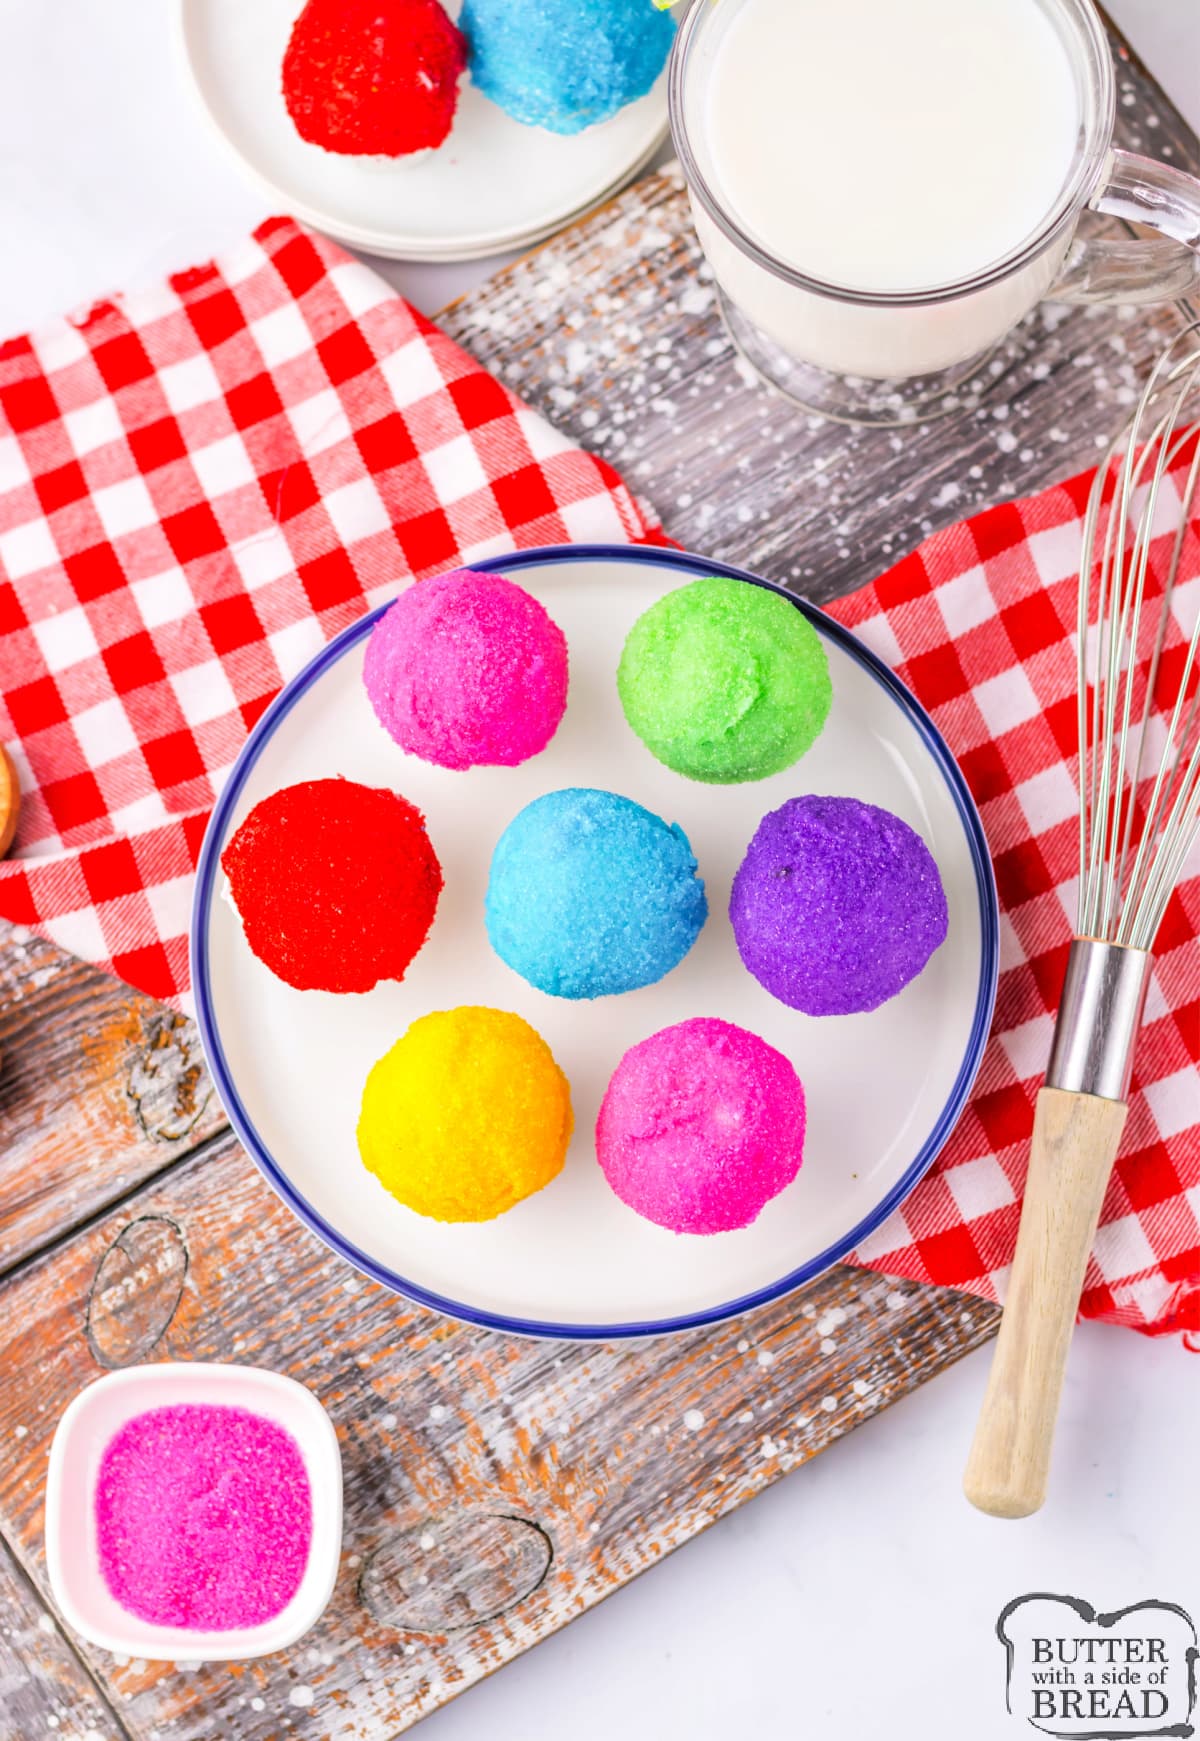 Rainbow Snow Cone Oreo Balls are made with only 4 ingredients! This delicious no-bake treat recipe is perfect for summertime parties! 